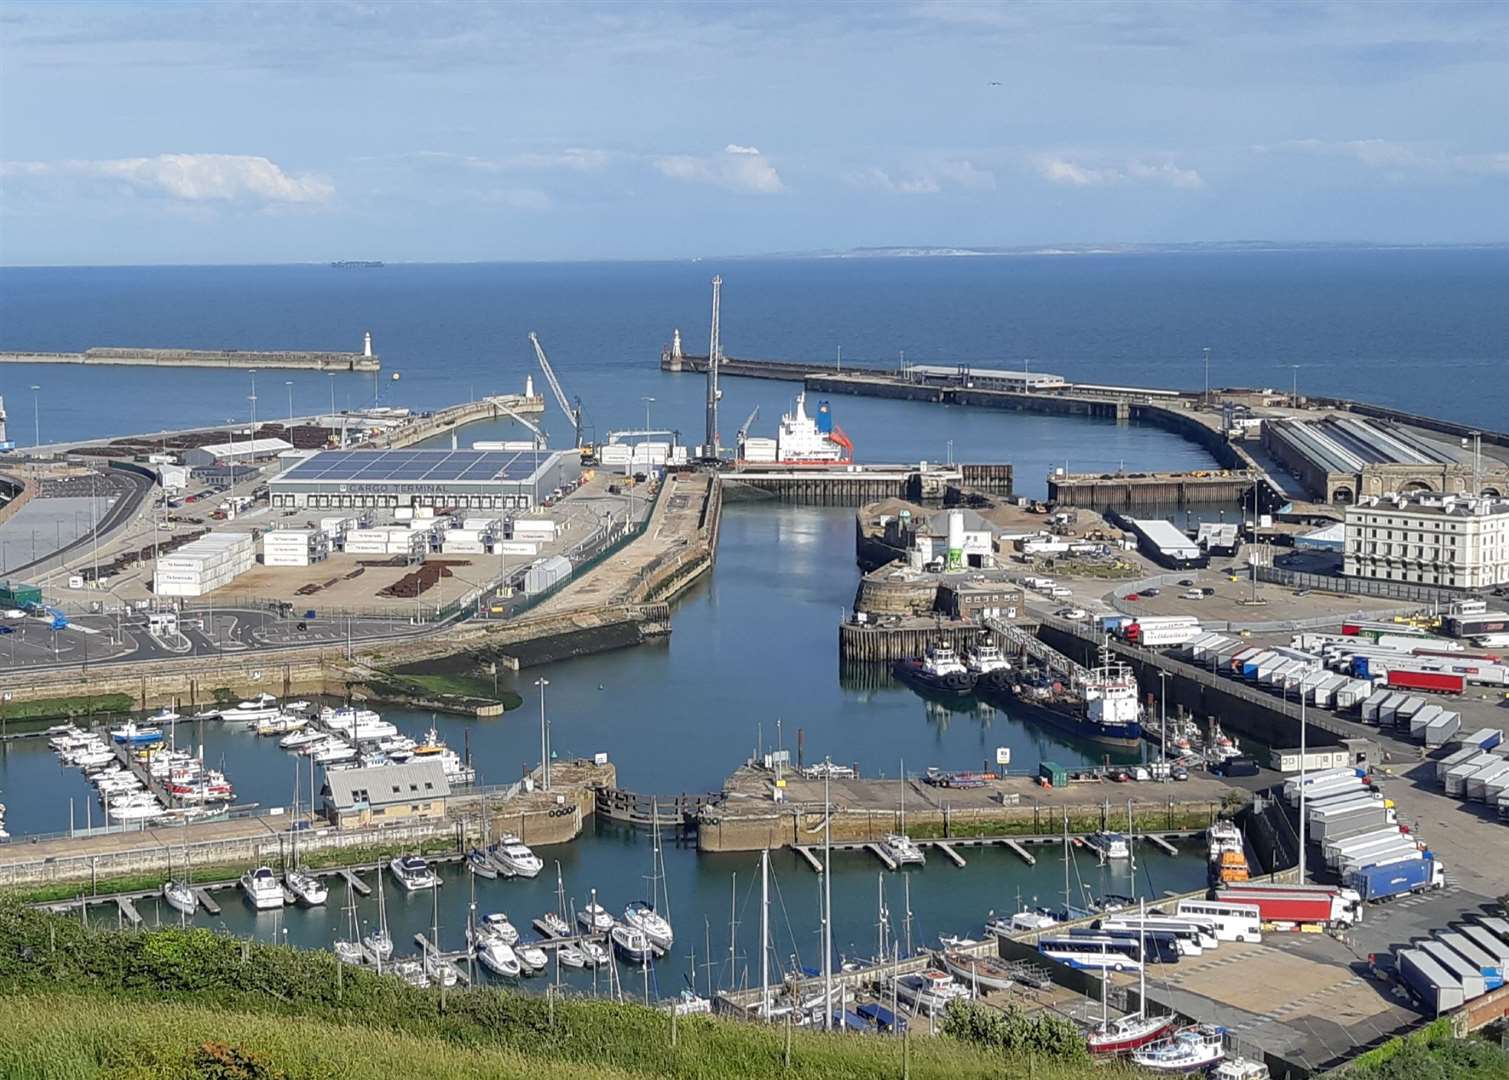 Material from the Goodwin Sands was wanted to redevelop Dover Western Docks